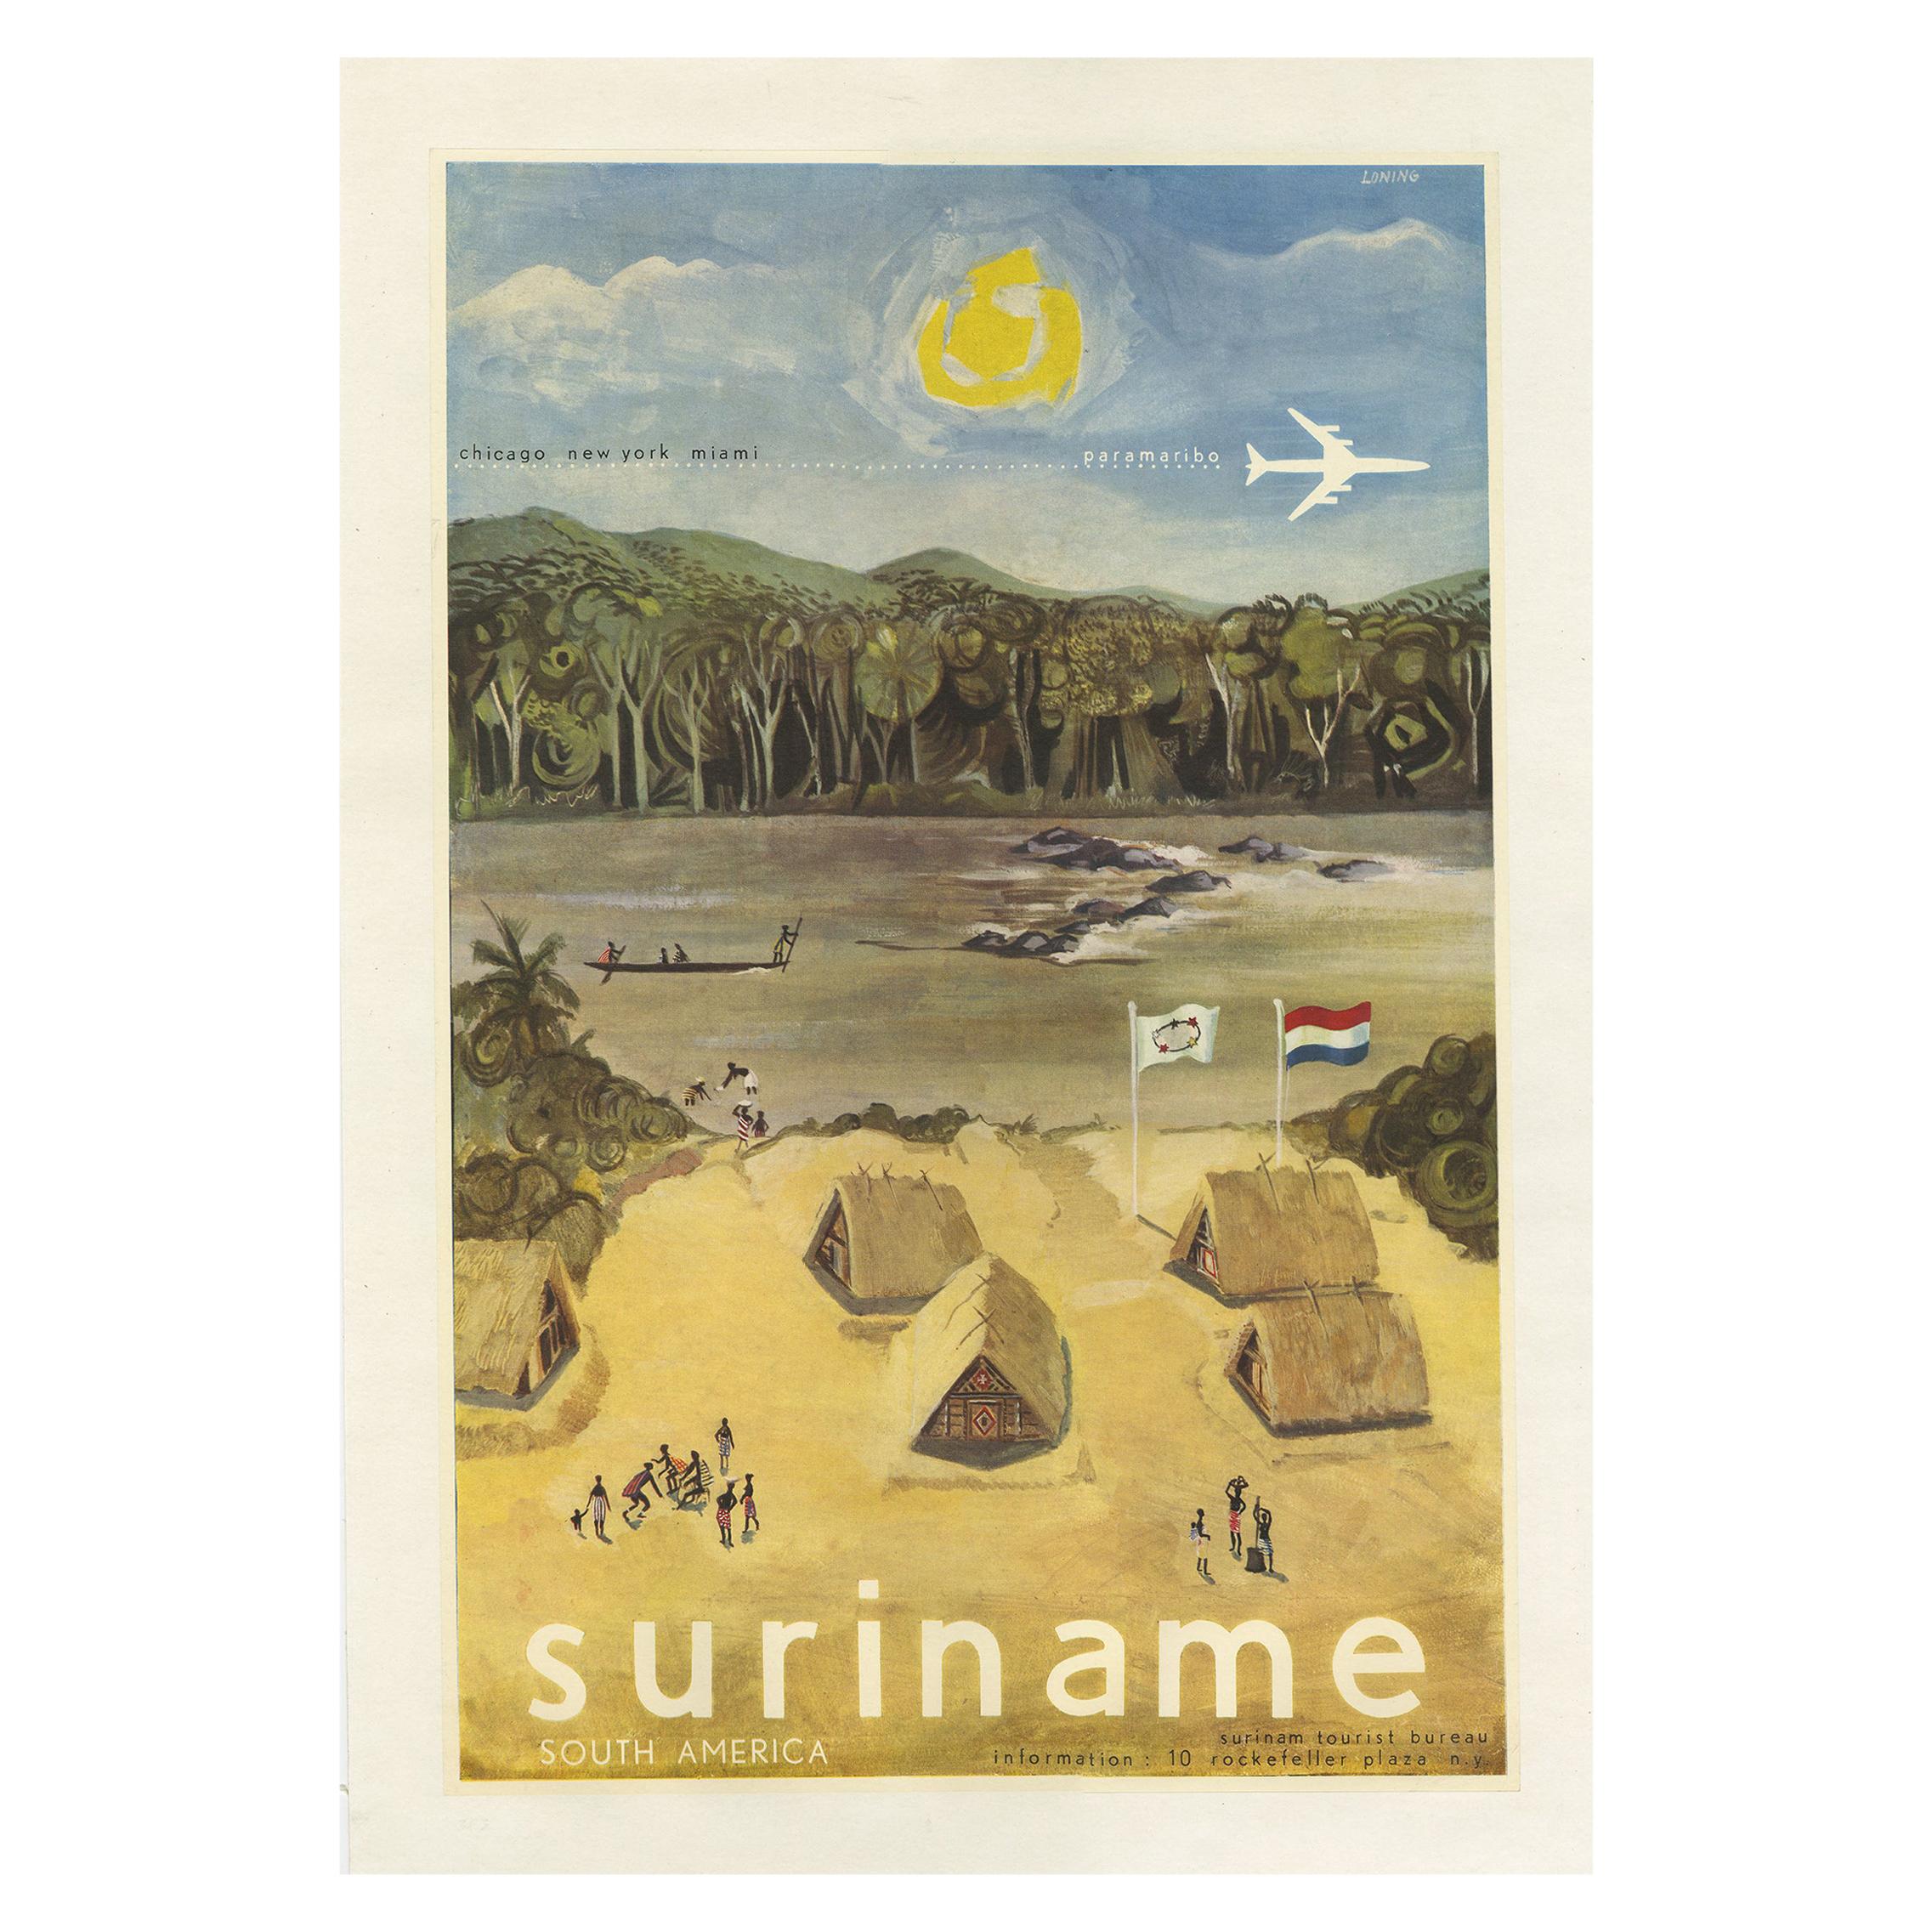 Vintage Poster Issued by the Suriname Tourist Bureau, circa 1950